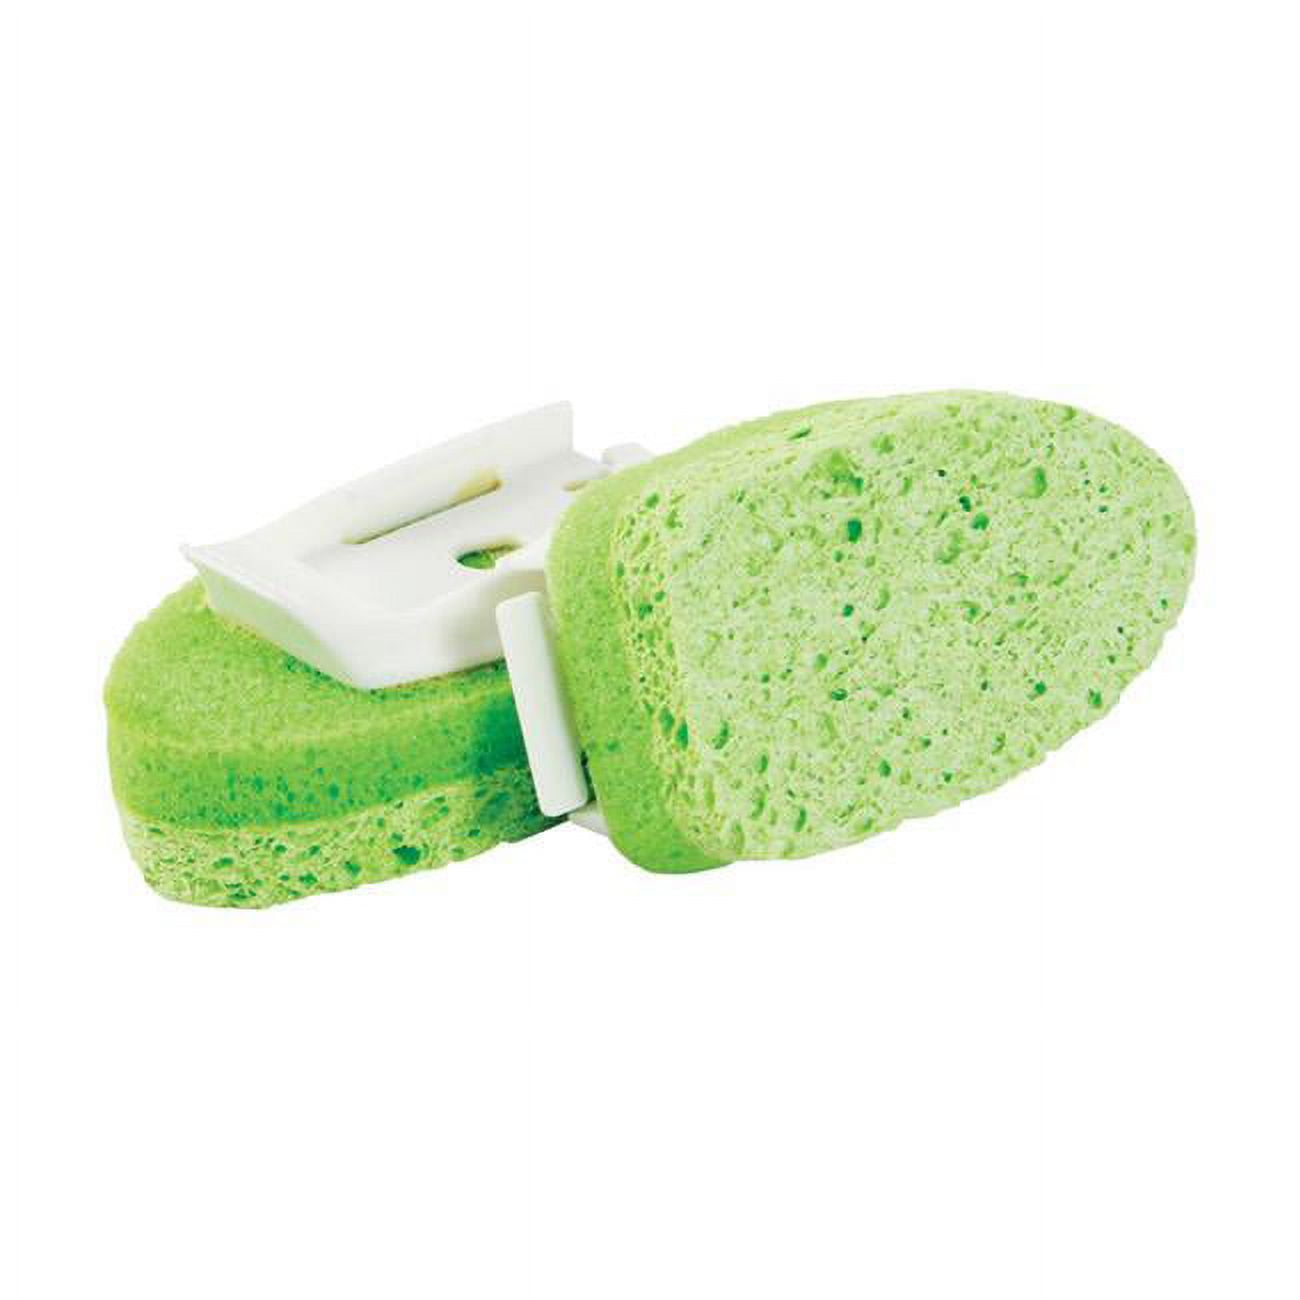 Libman Commercial Gentle Touch Foaming Dish Wand Refills, 3-5/8”H x  3-1/8”W, Green, 2 Sponges Per Pack, Set Of 6 Packs